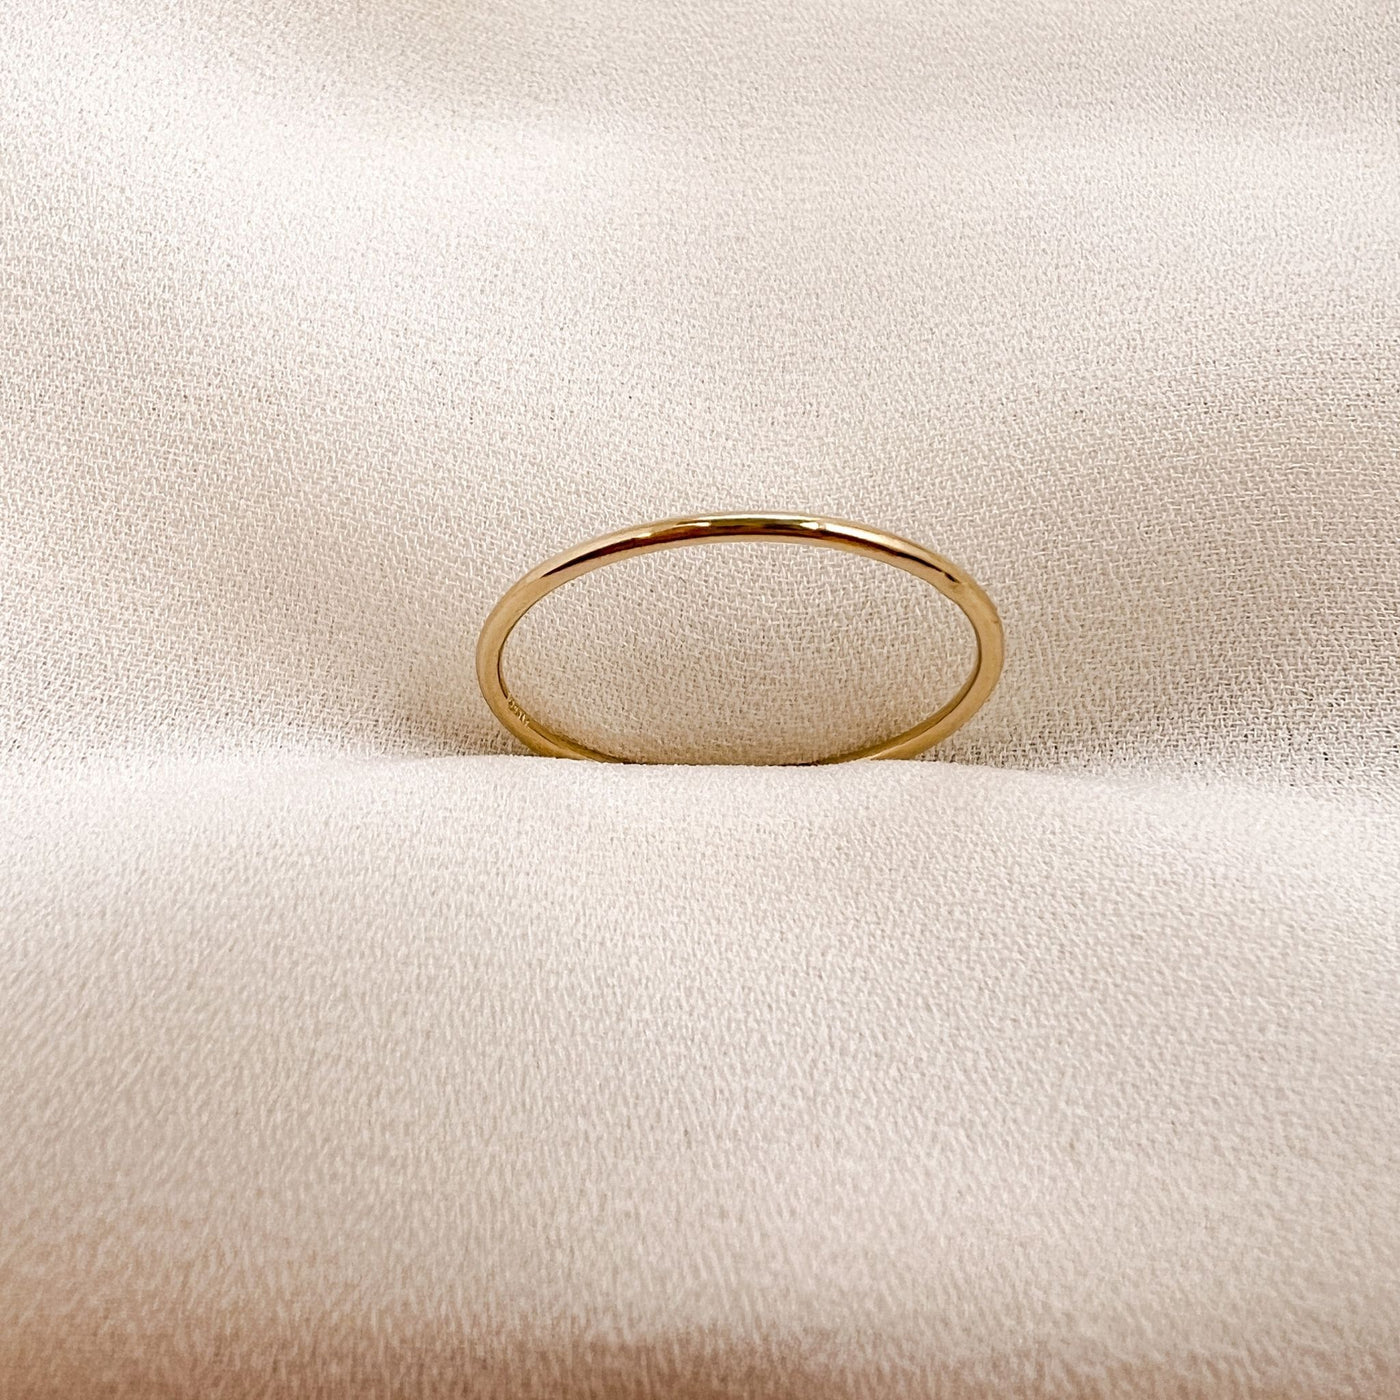 Simple 14Kgold filled 1mm band ring on cream coloured fabric